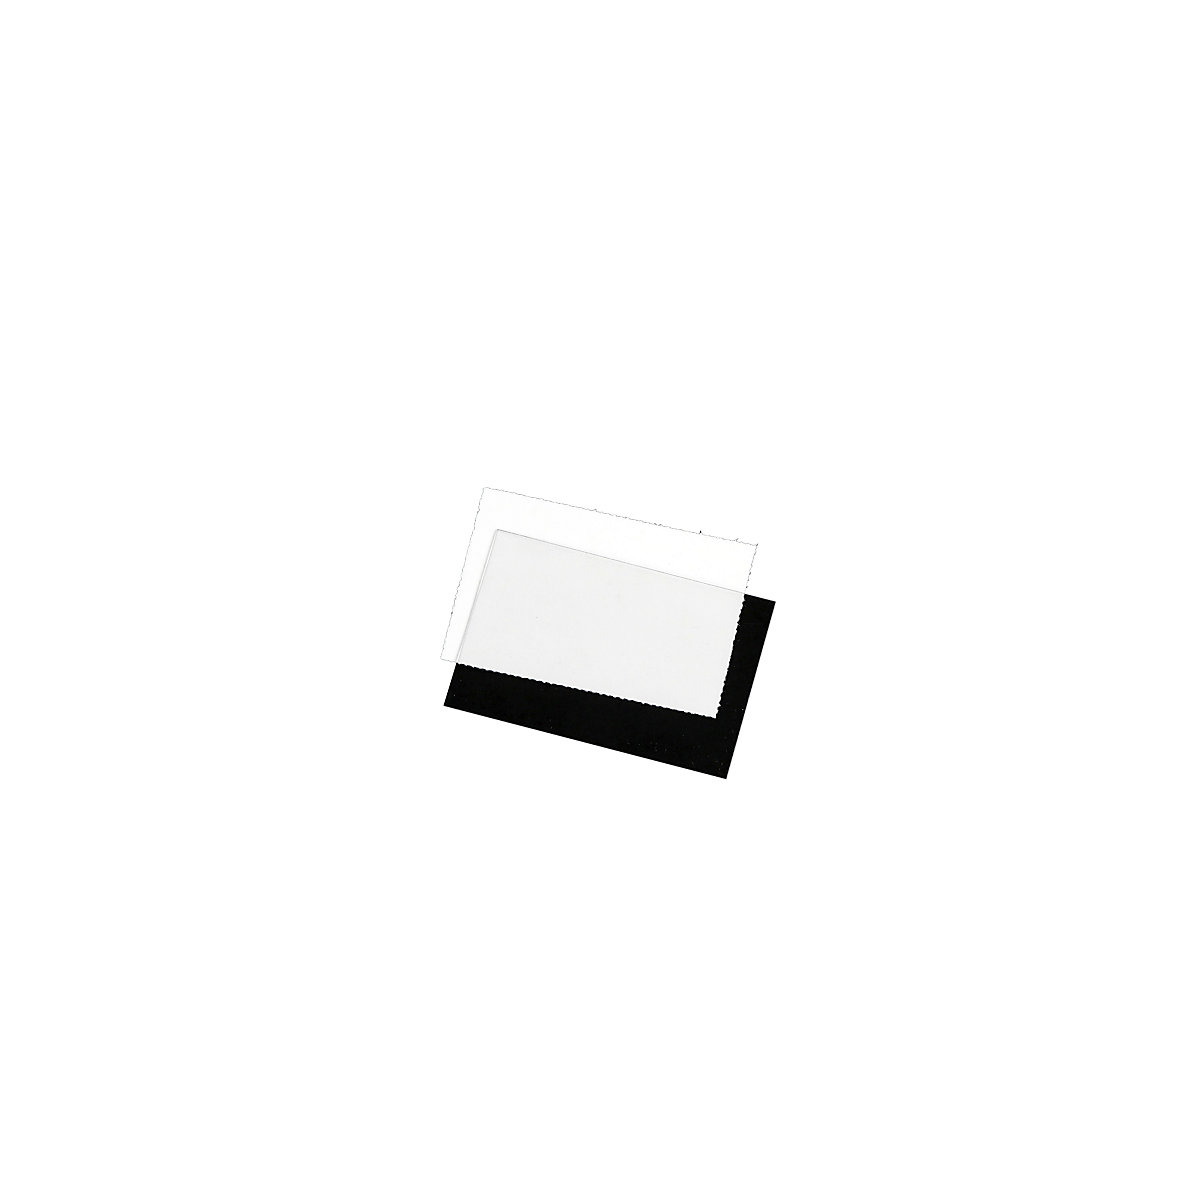 Labels, for shelf bin, for WxH 94 x 80 mm, pack of 500-3